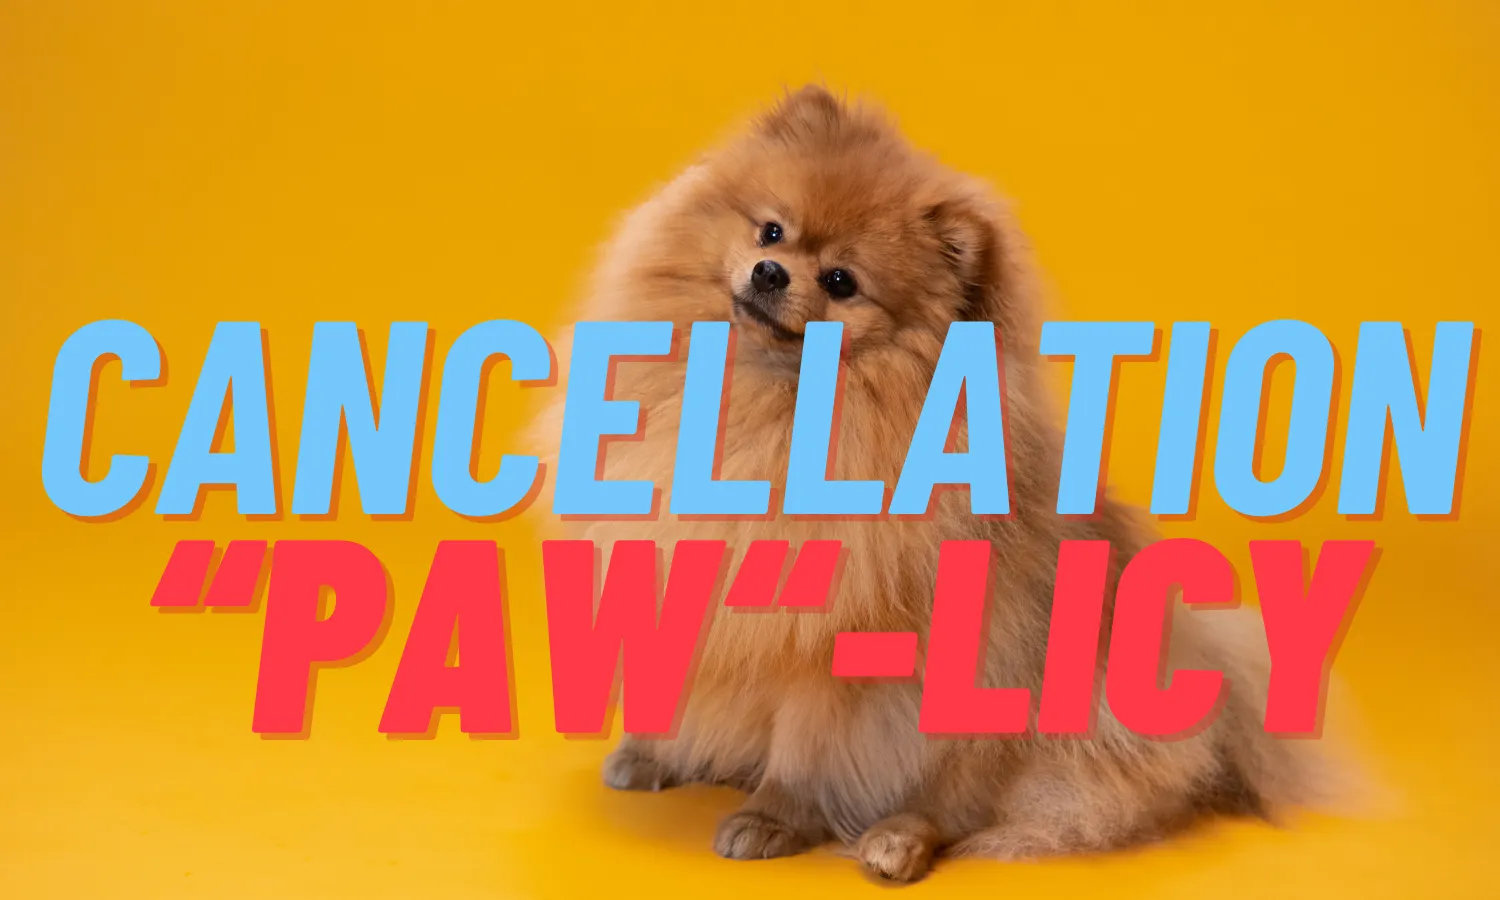 Cancellation "Paw"-licy